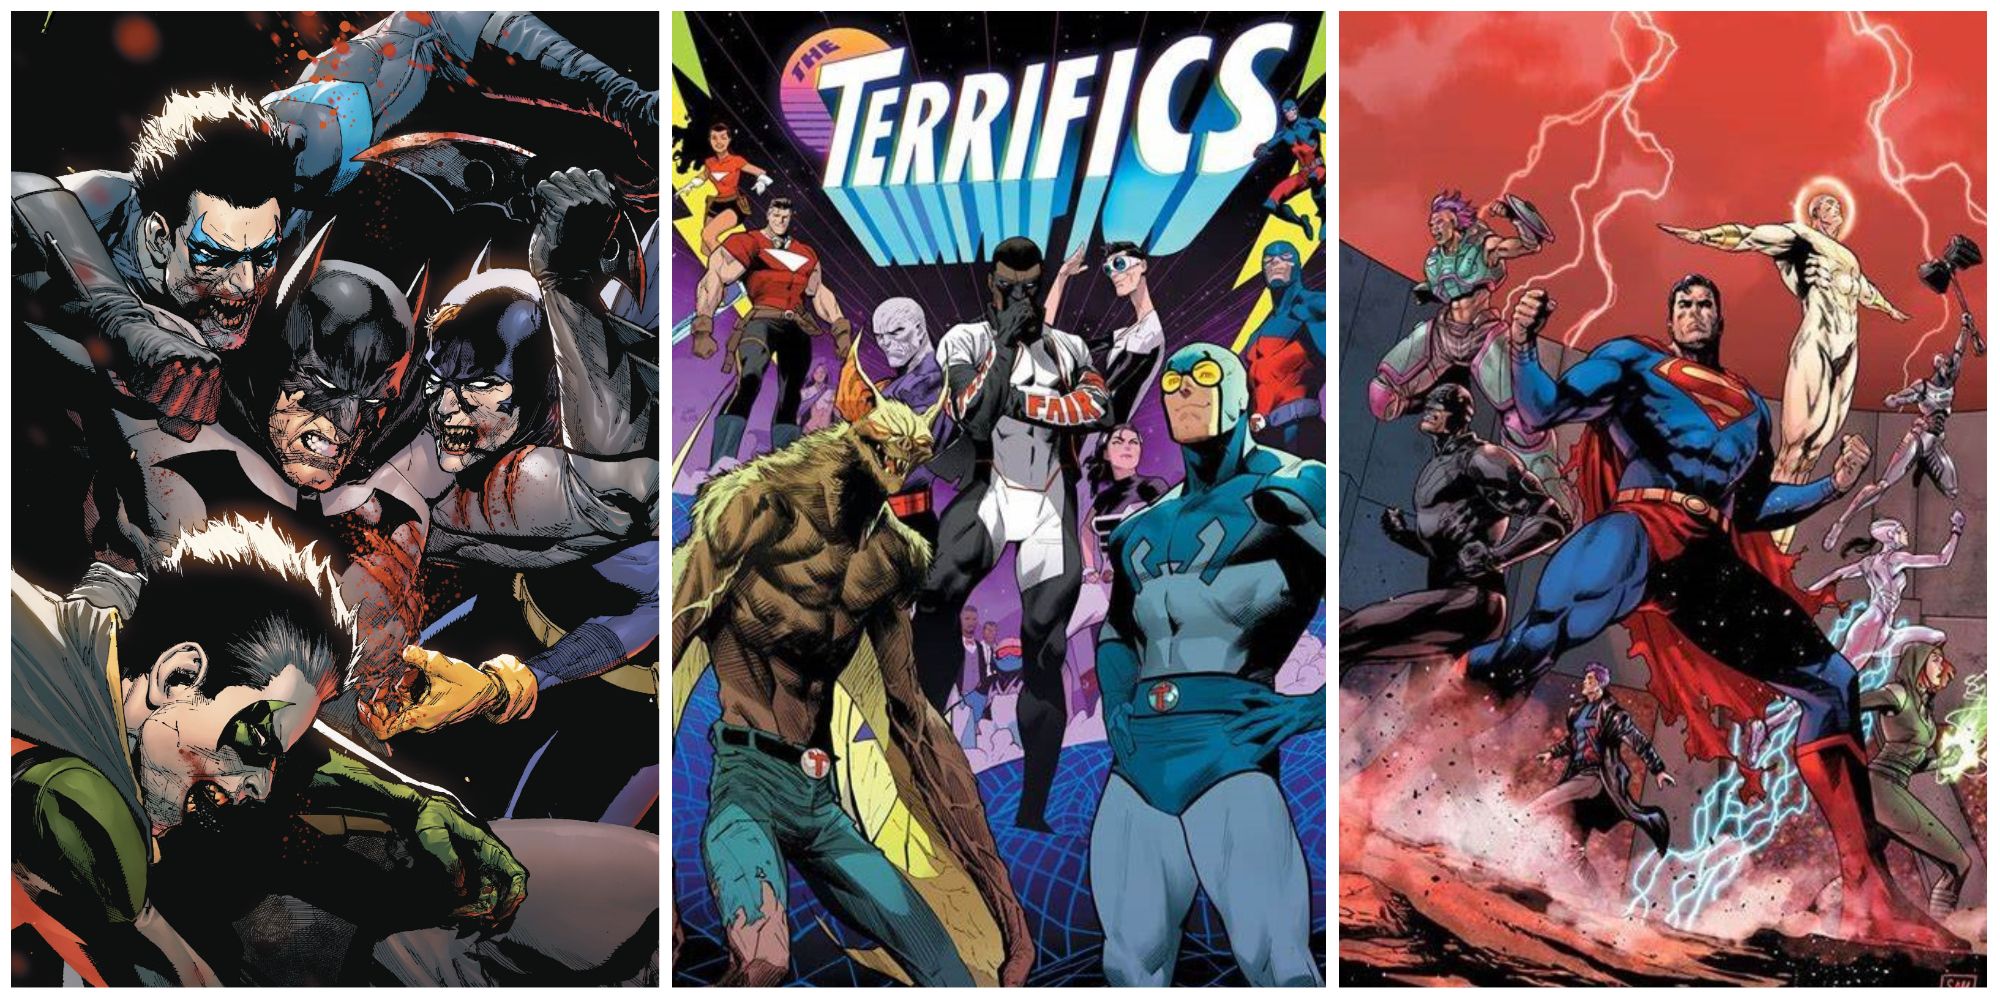 Split image DCeased zombies, The Terrifics heroes, Superman and Authority Warworld